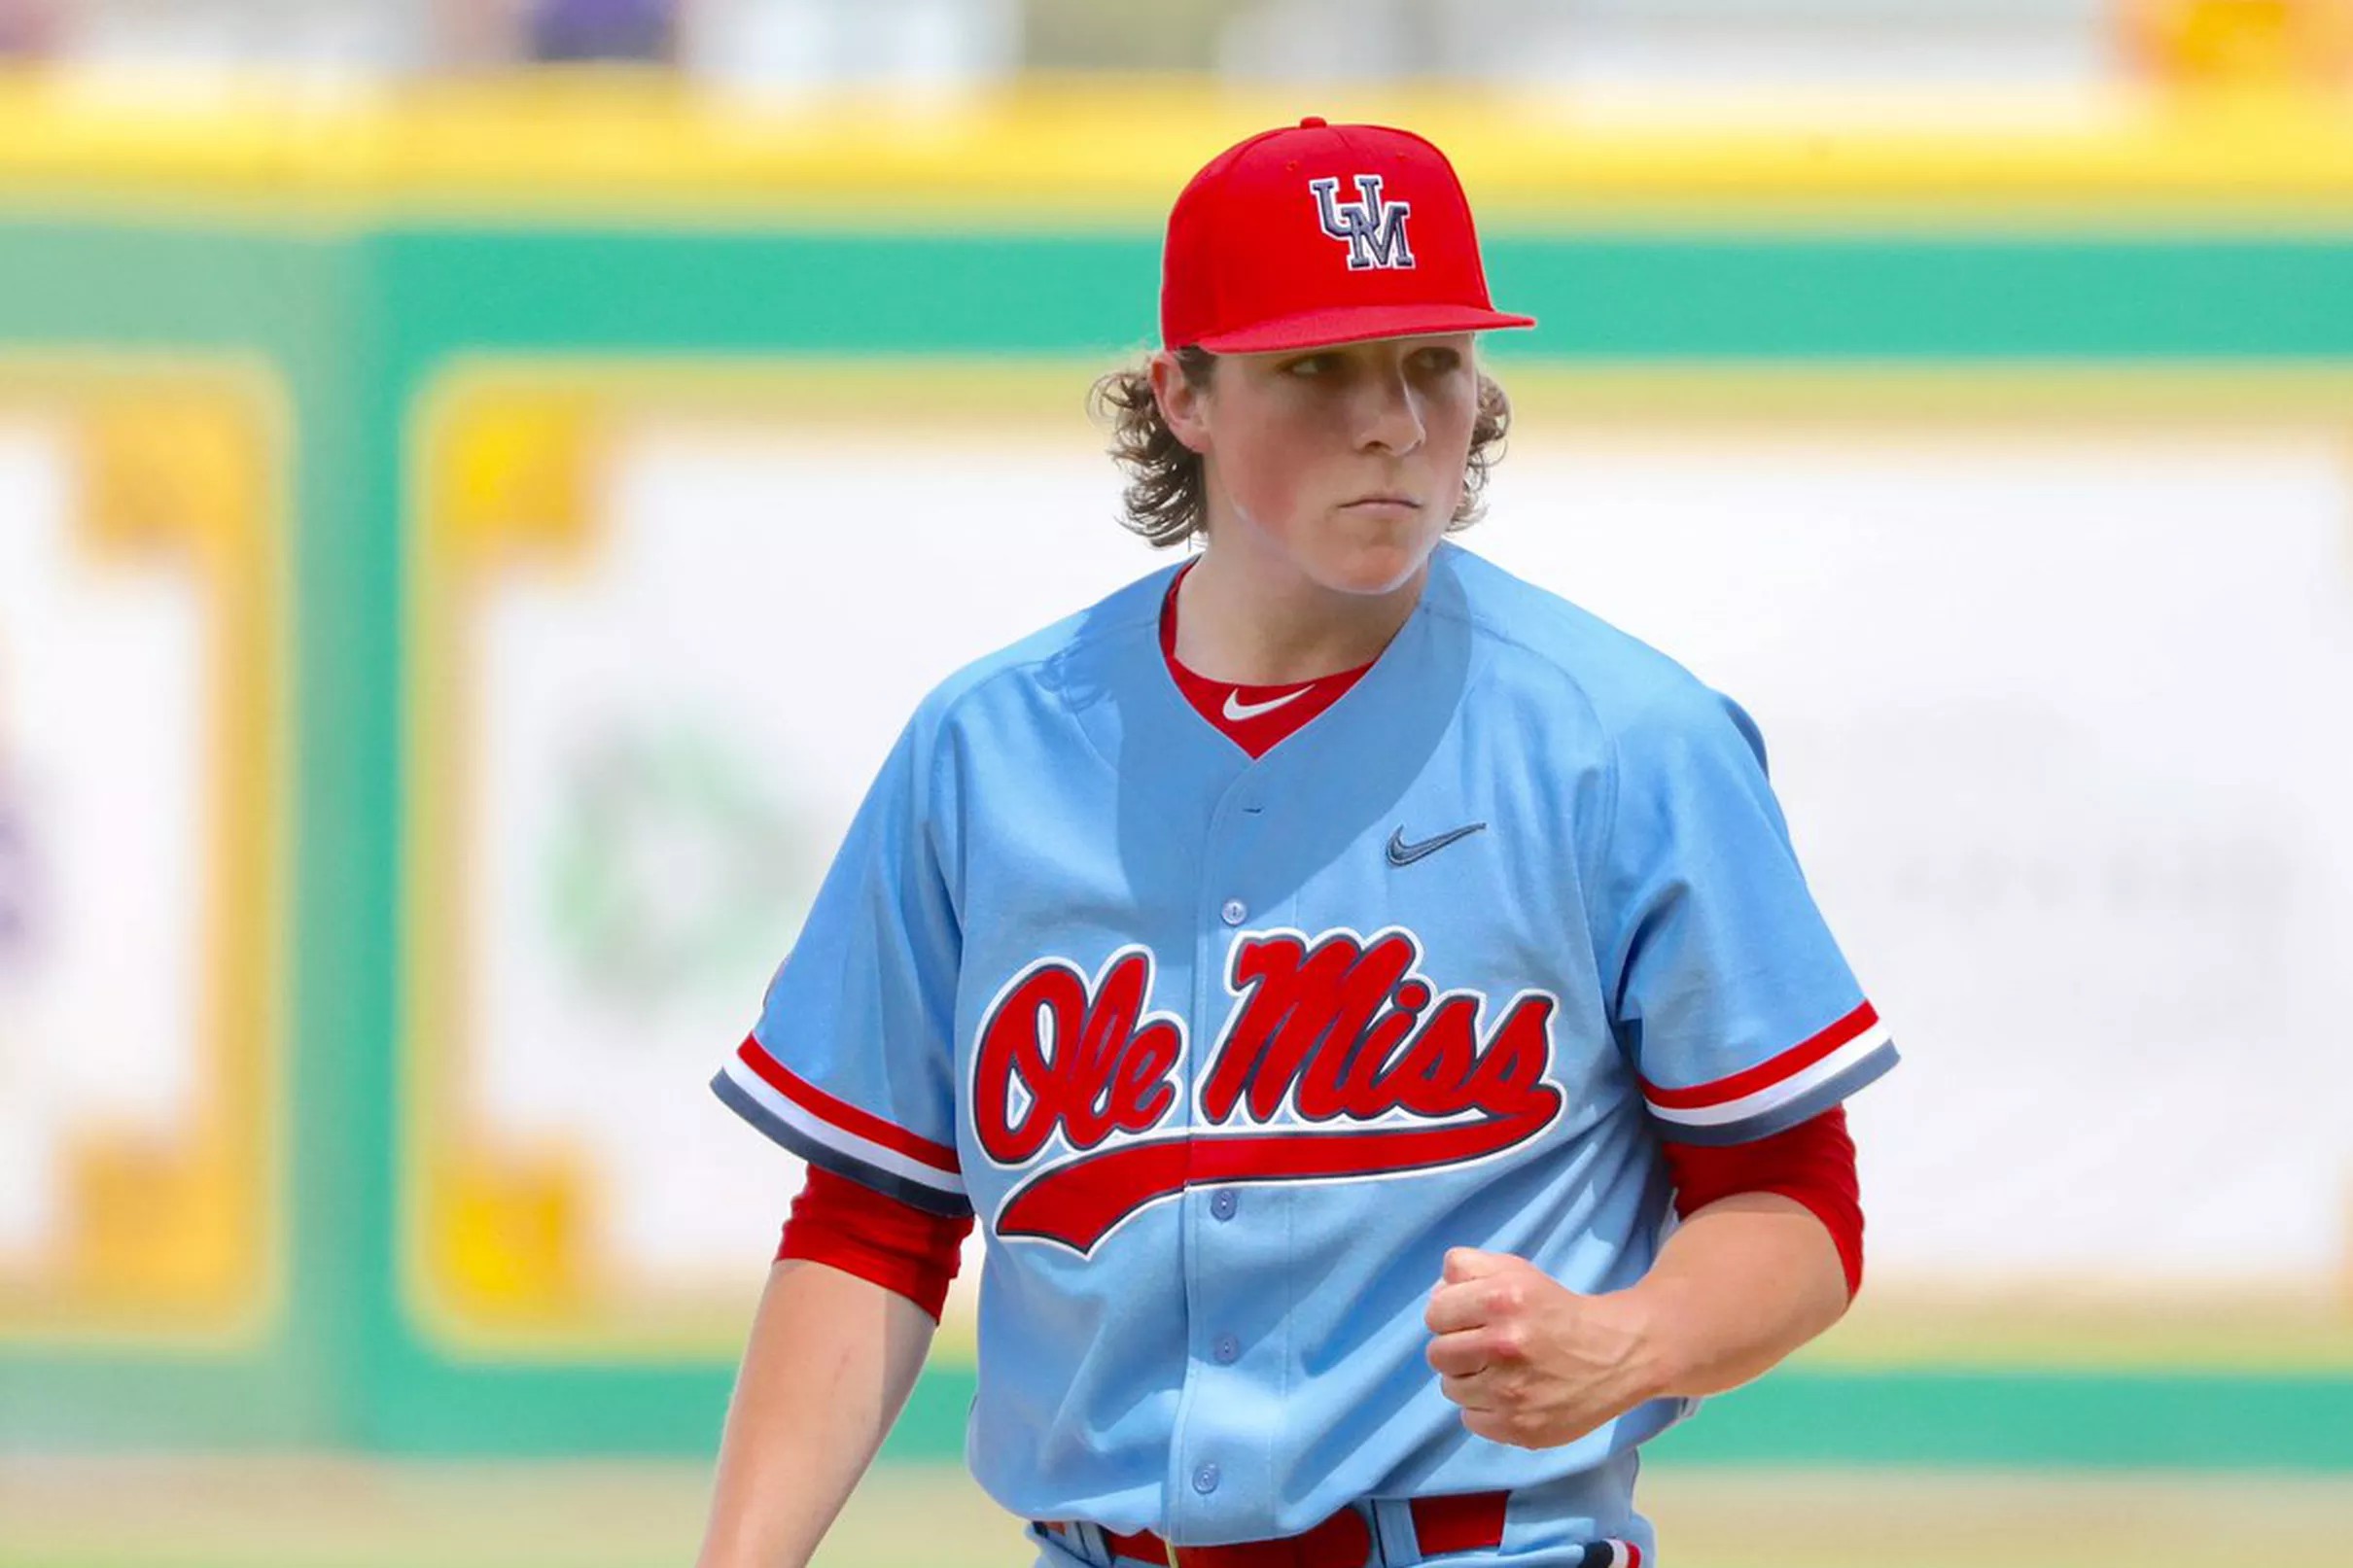 Ole Miss baseball vs. Winthrop Online streaming, game times and preview